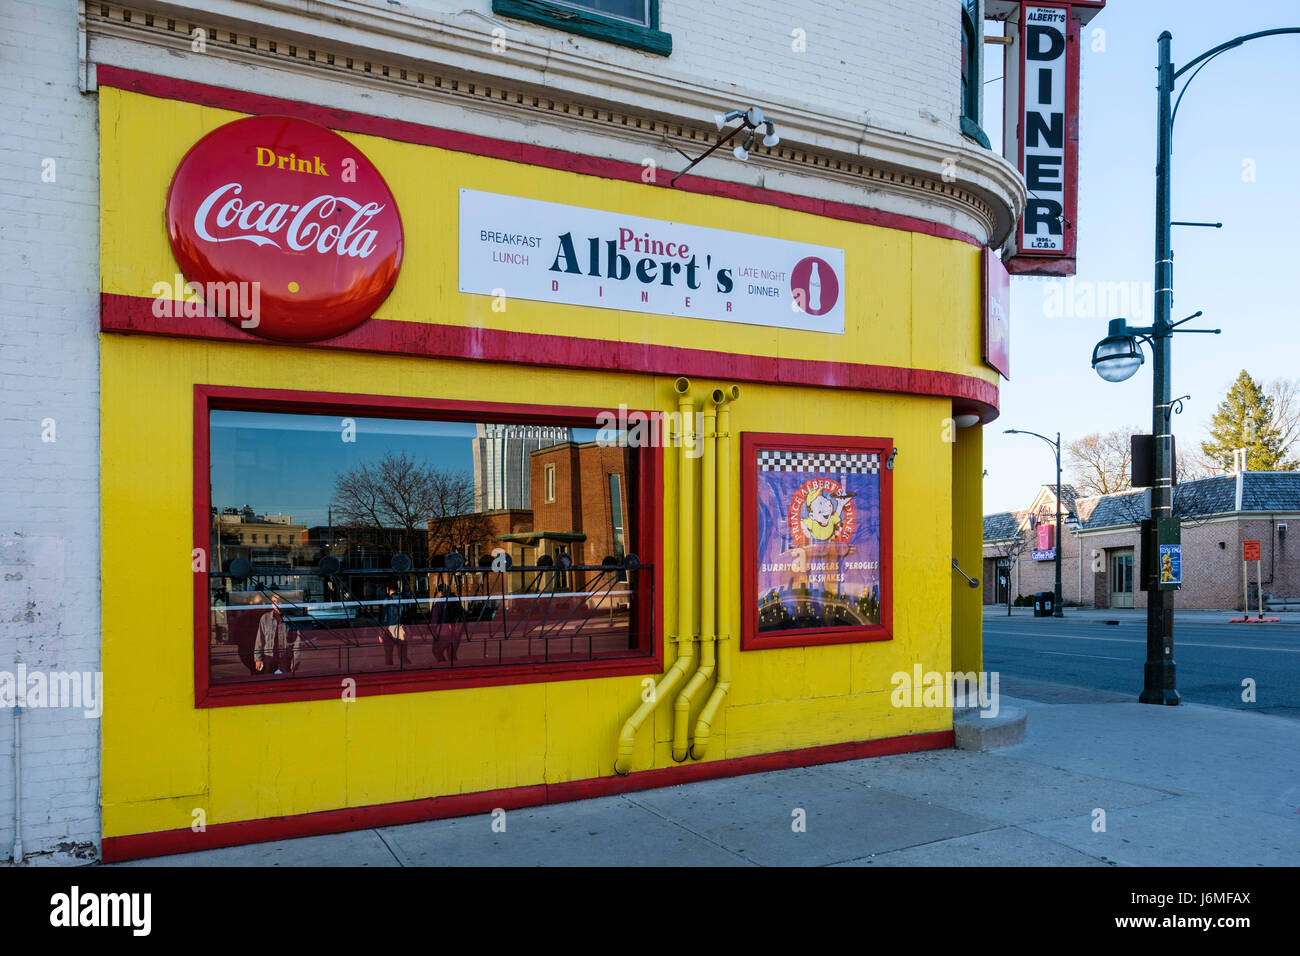 Prince Albert's Diner, a fast-food restaurant in downtown London, Ontario, Canada. Stock Photo